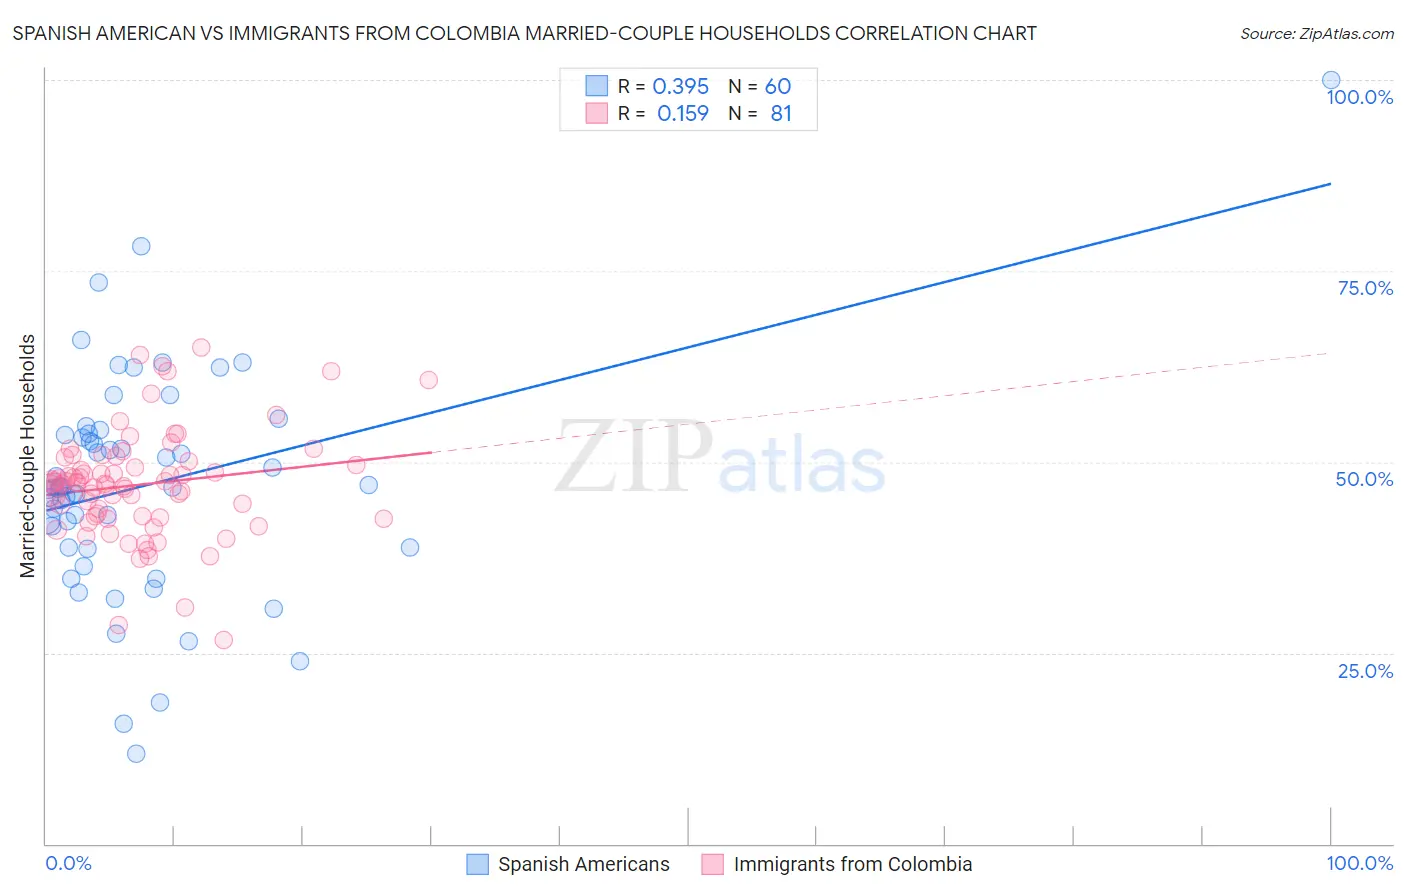 Spanish American vs Immigrants from Colombia Married-couple Households